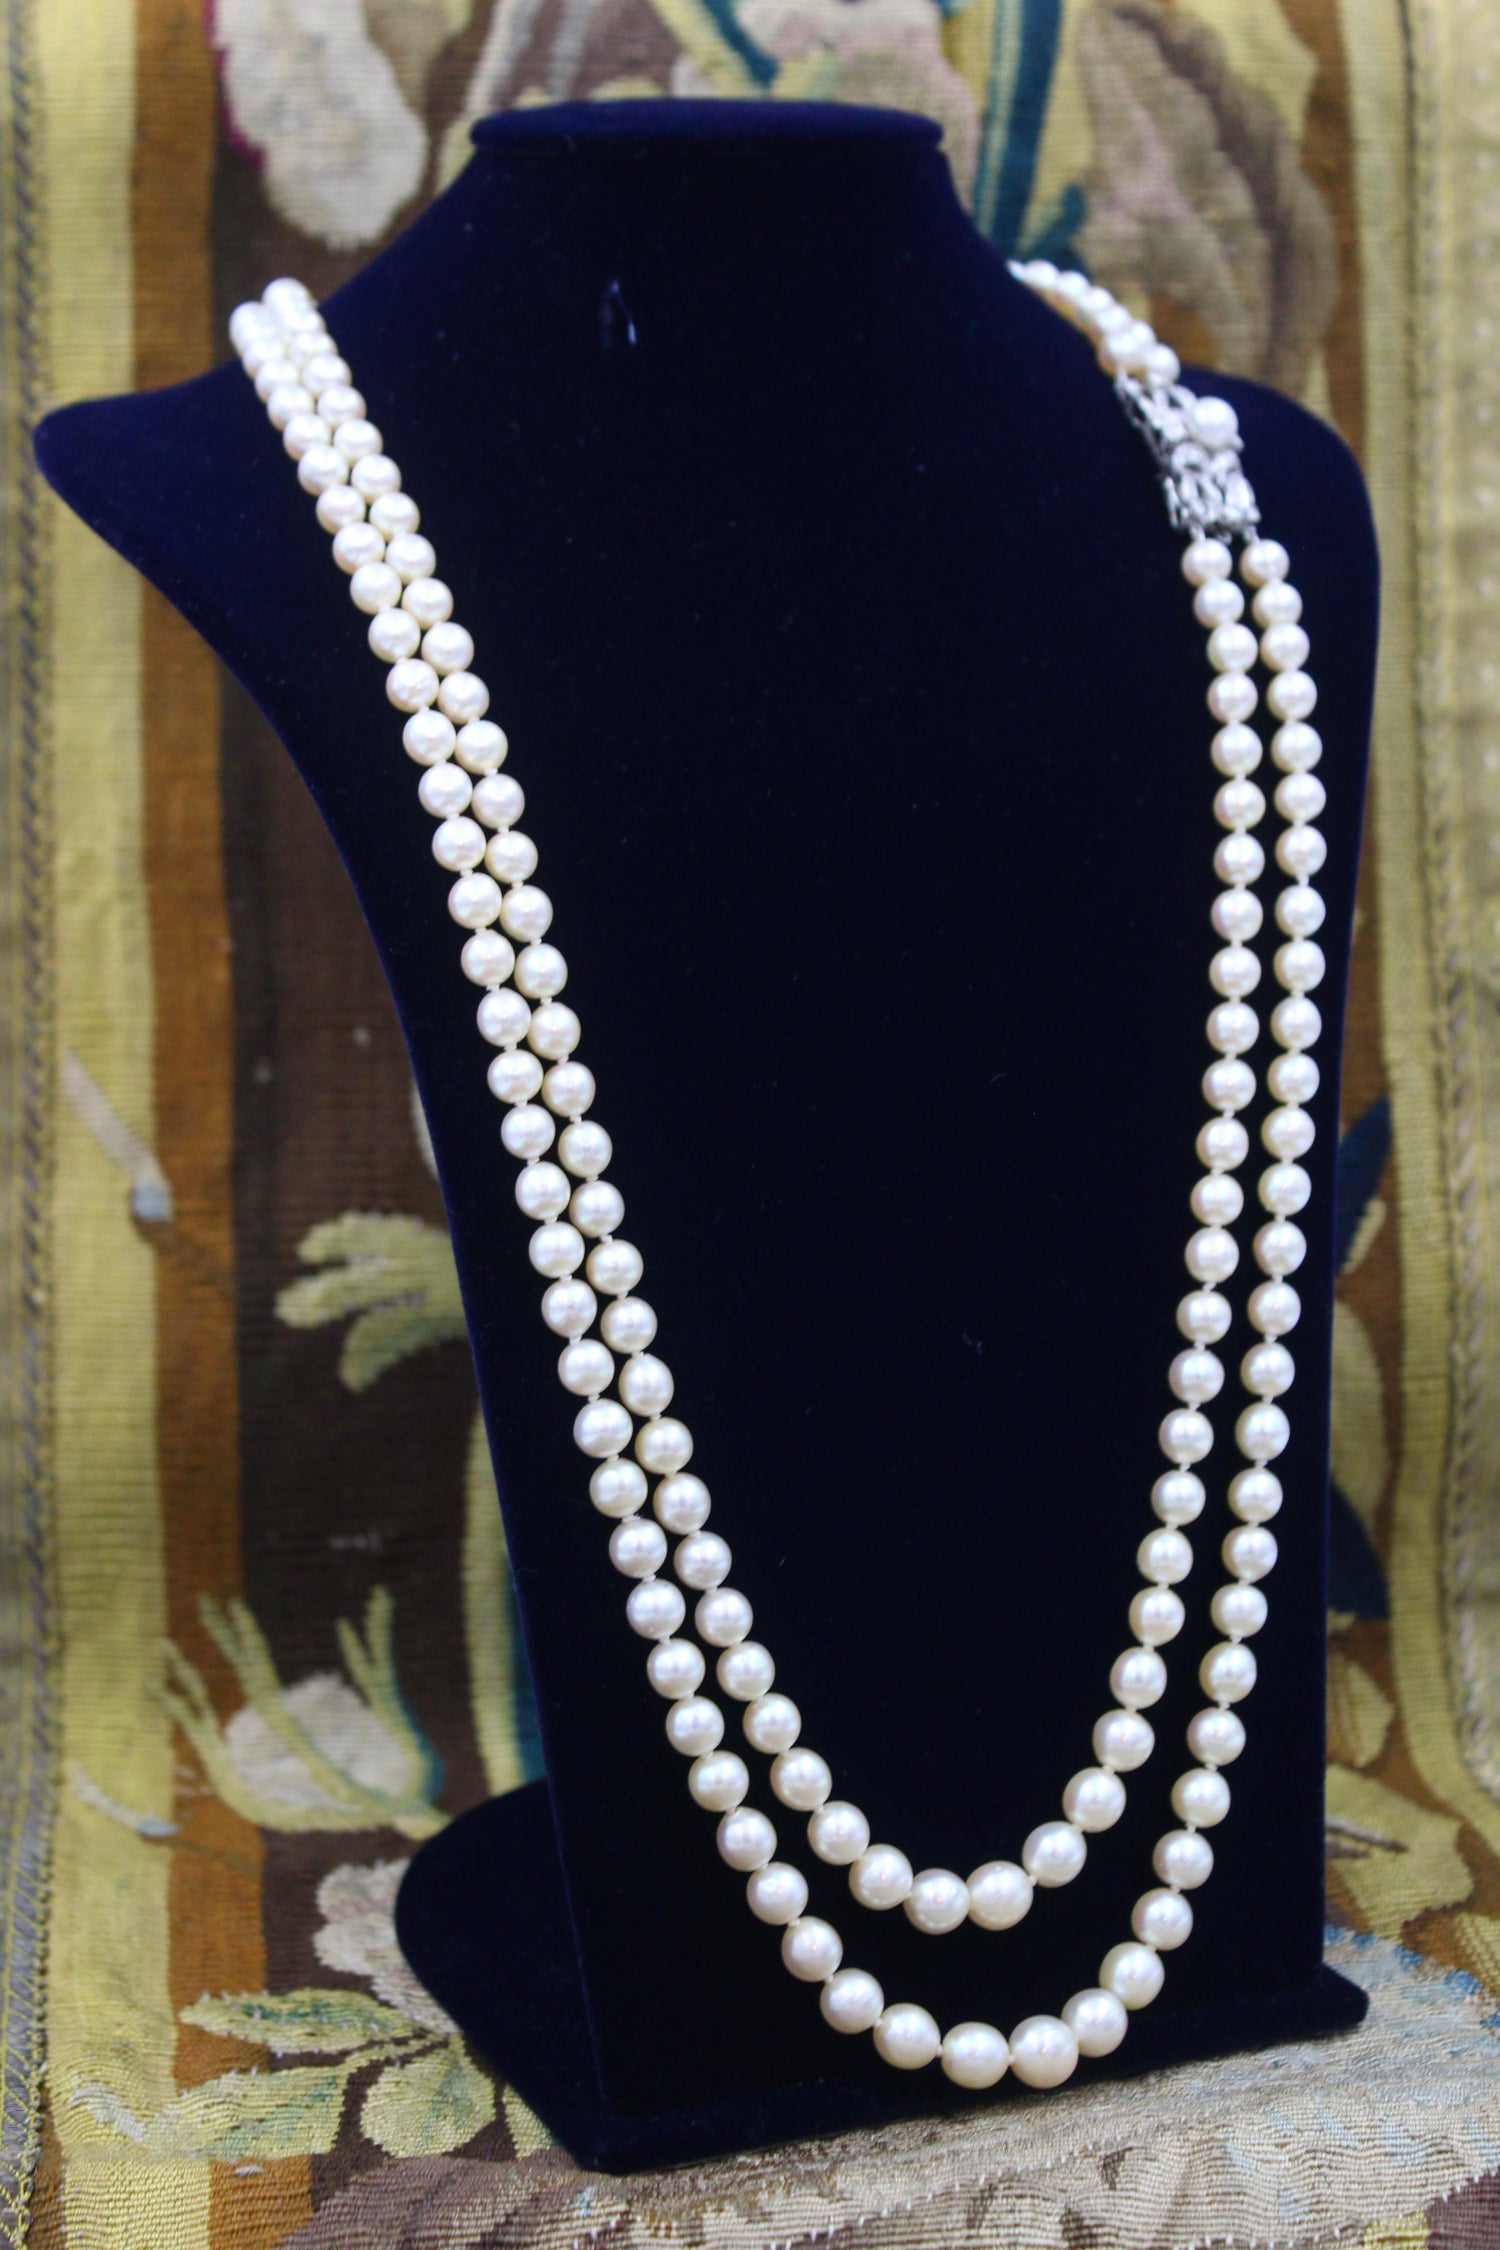 A very fine Platinum (tested) Graduated Cultured Pearl Necklace with a Diamond Clasp - Robin Haydock Antiques